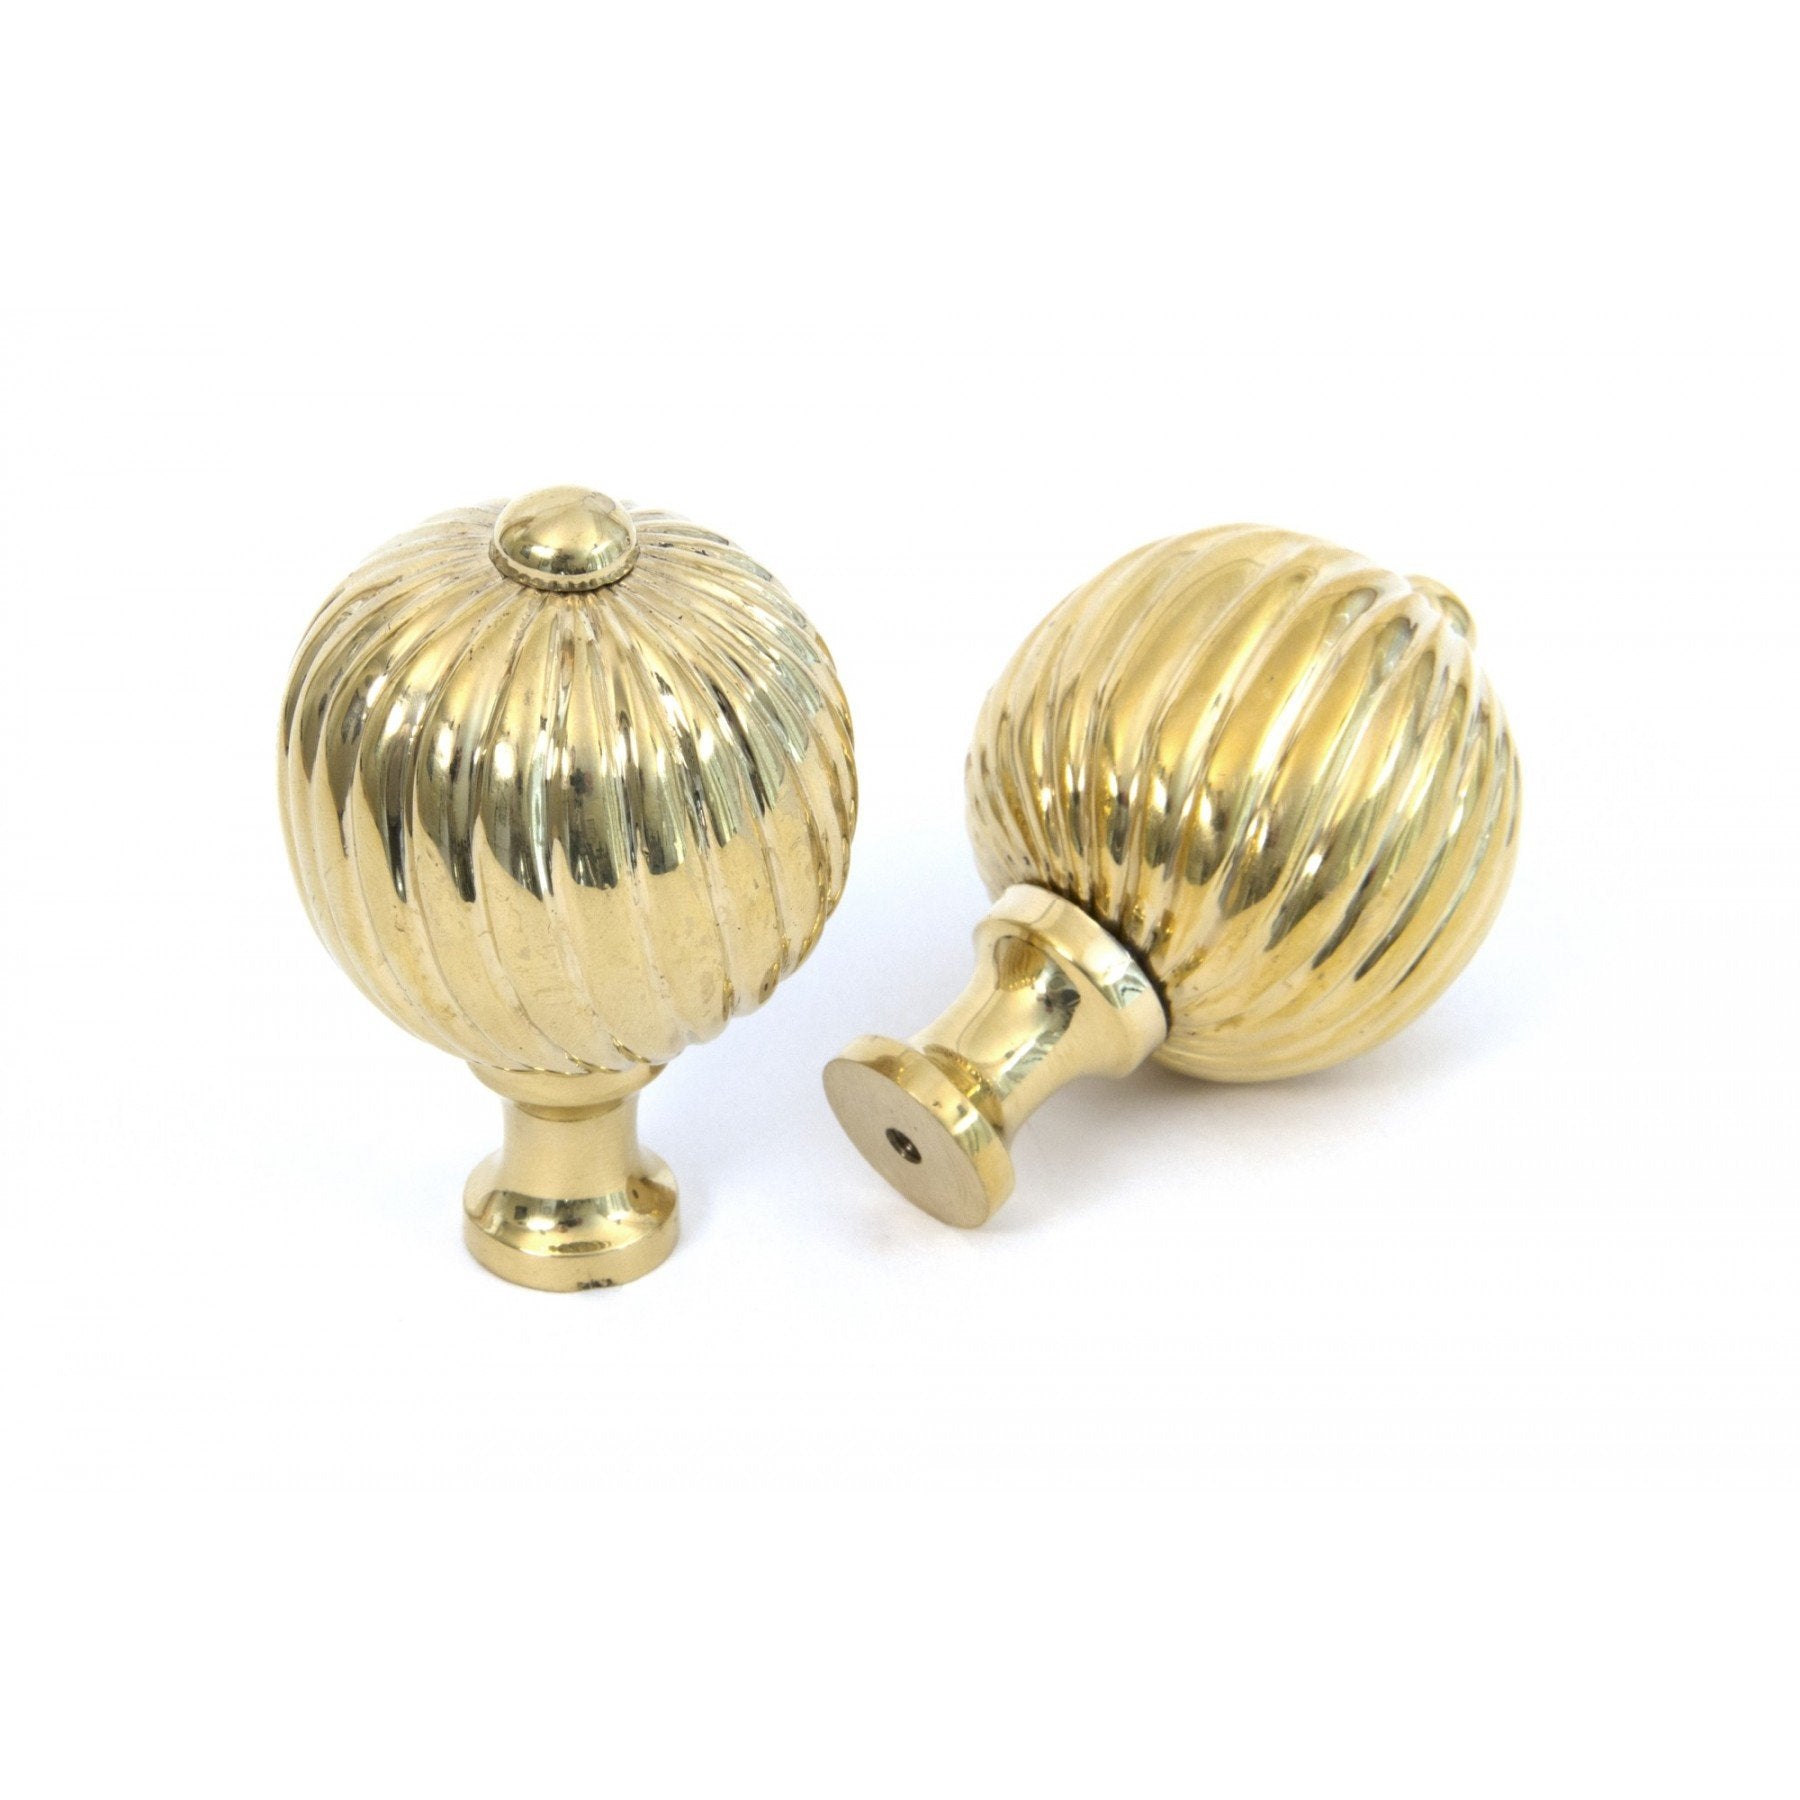 From the Anvil Polished Brass Spiral Cabinet Knob - Large